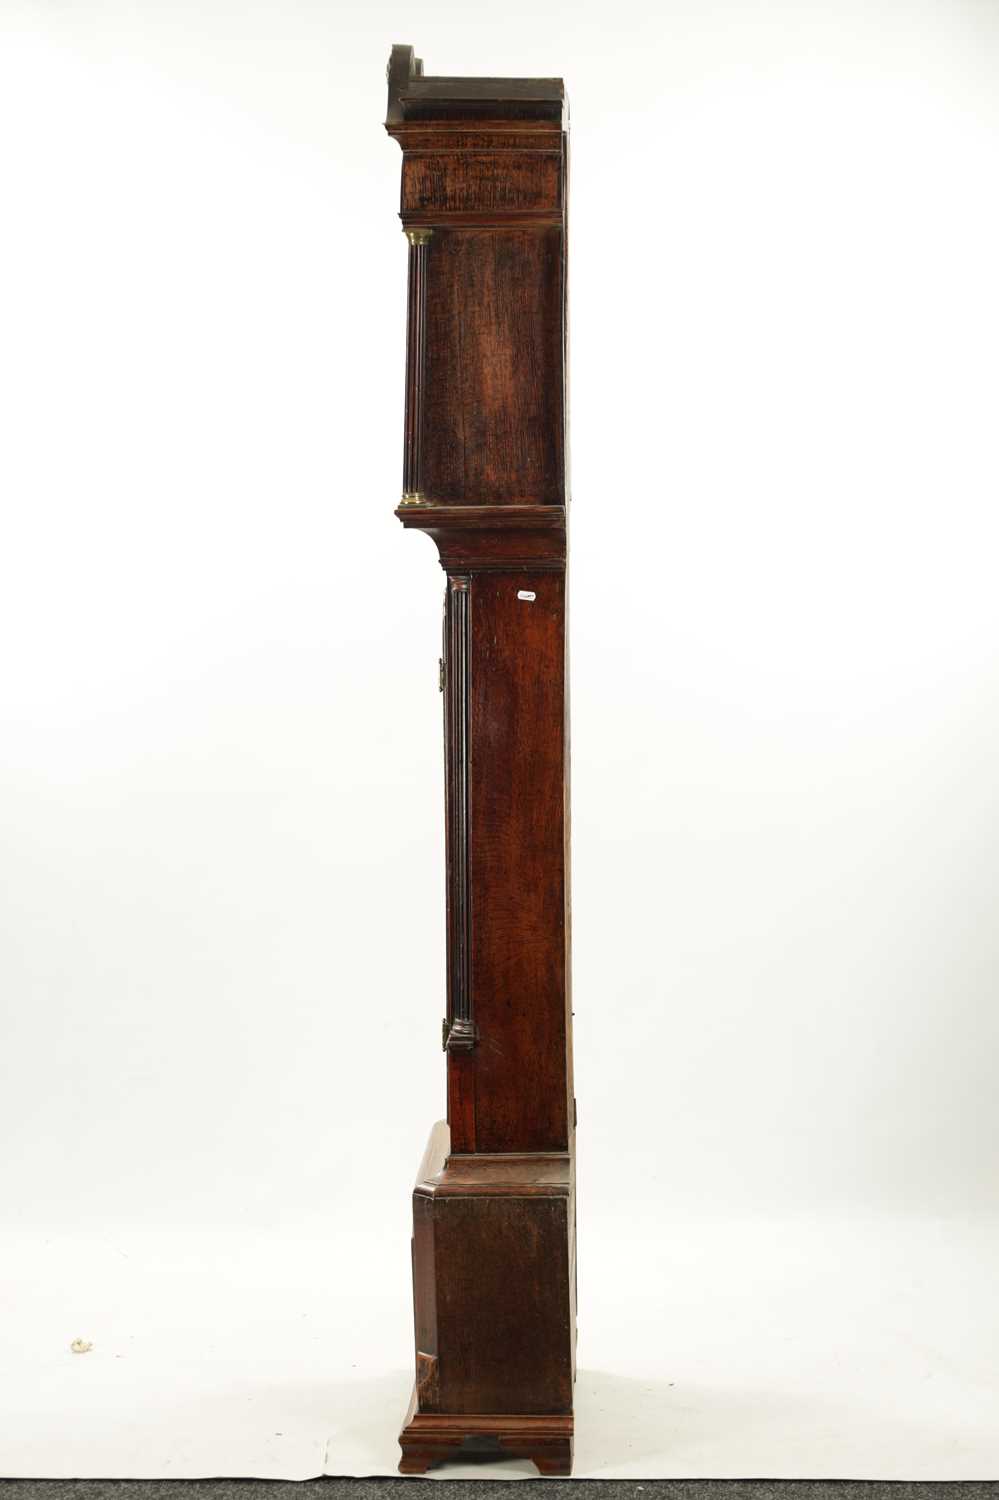 JASON GREEN, NANTWICH. A GEORGE III EIGHT-DAY LONGCASE CLOCK OF SMALL PROPORTIONS - Image 7 of 7